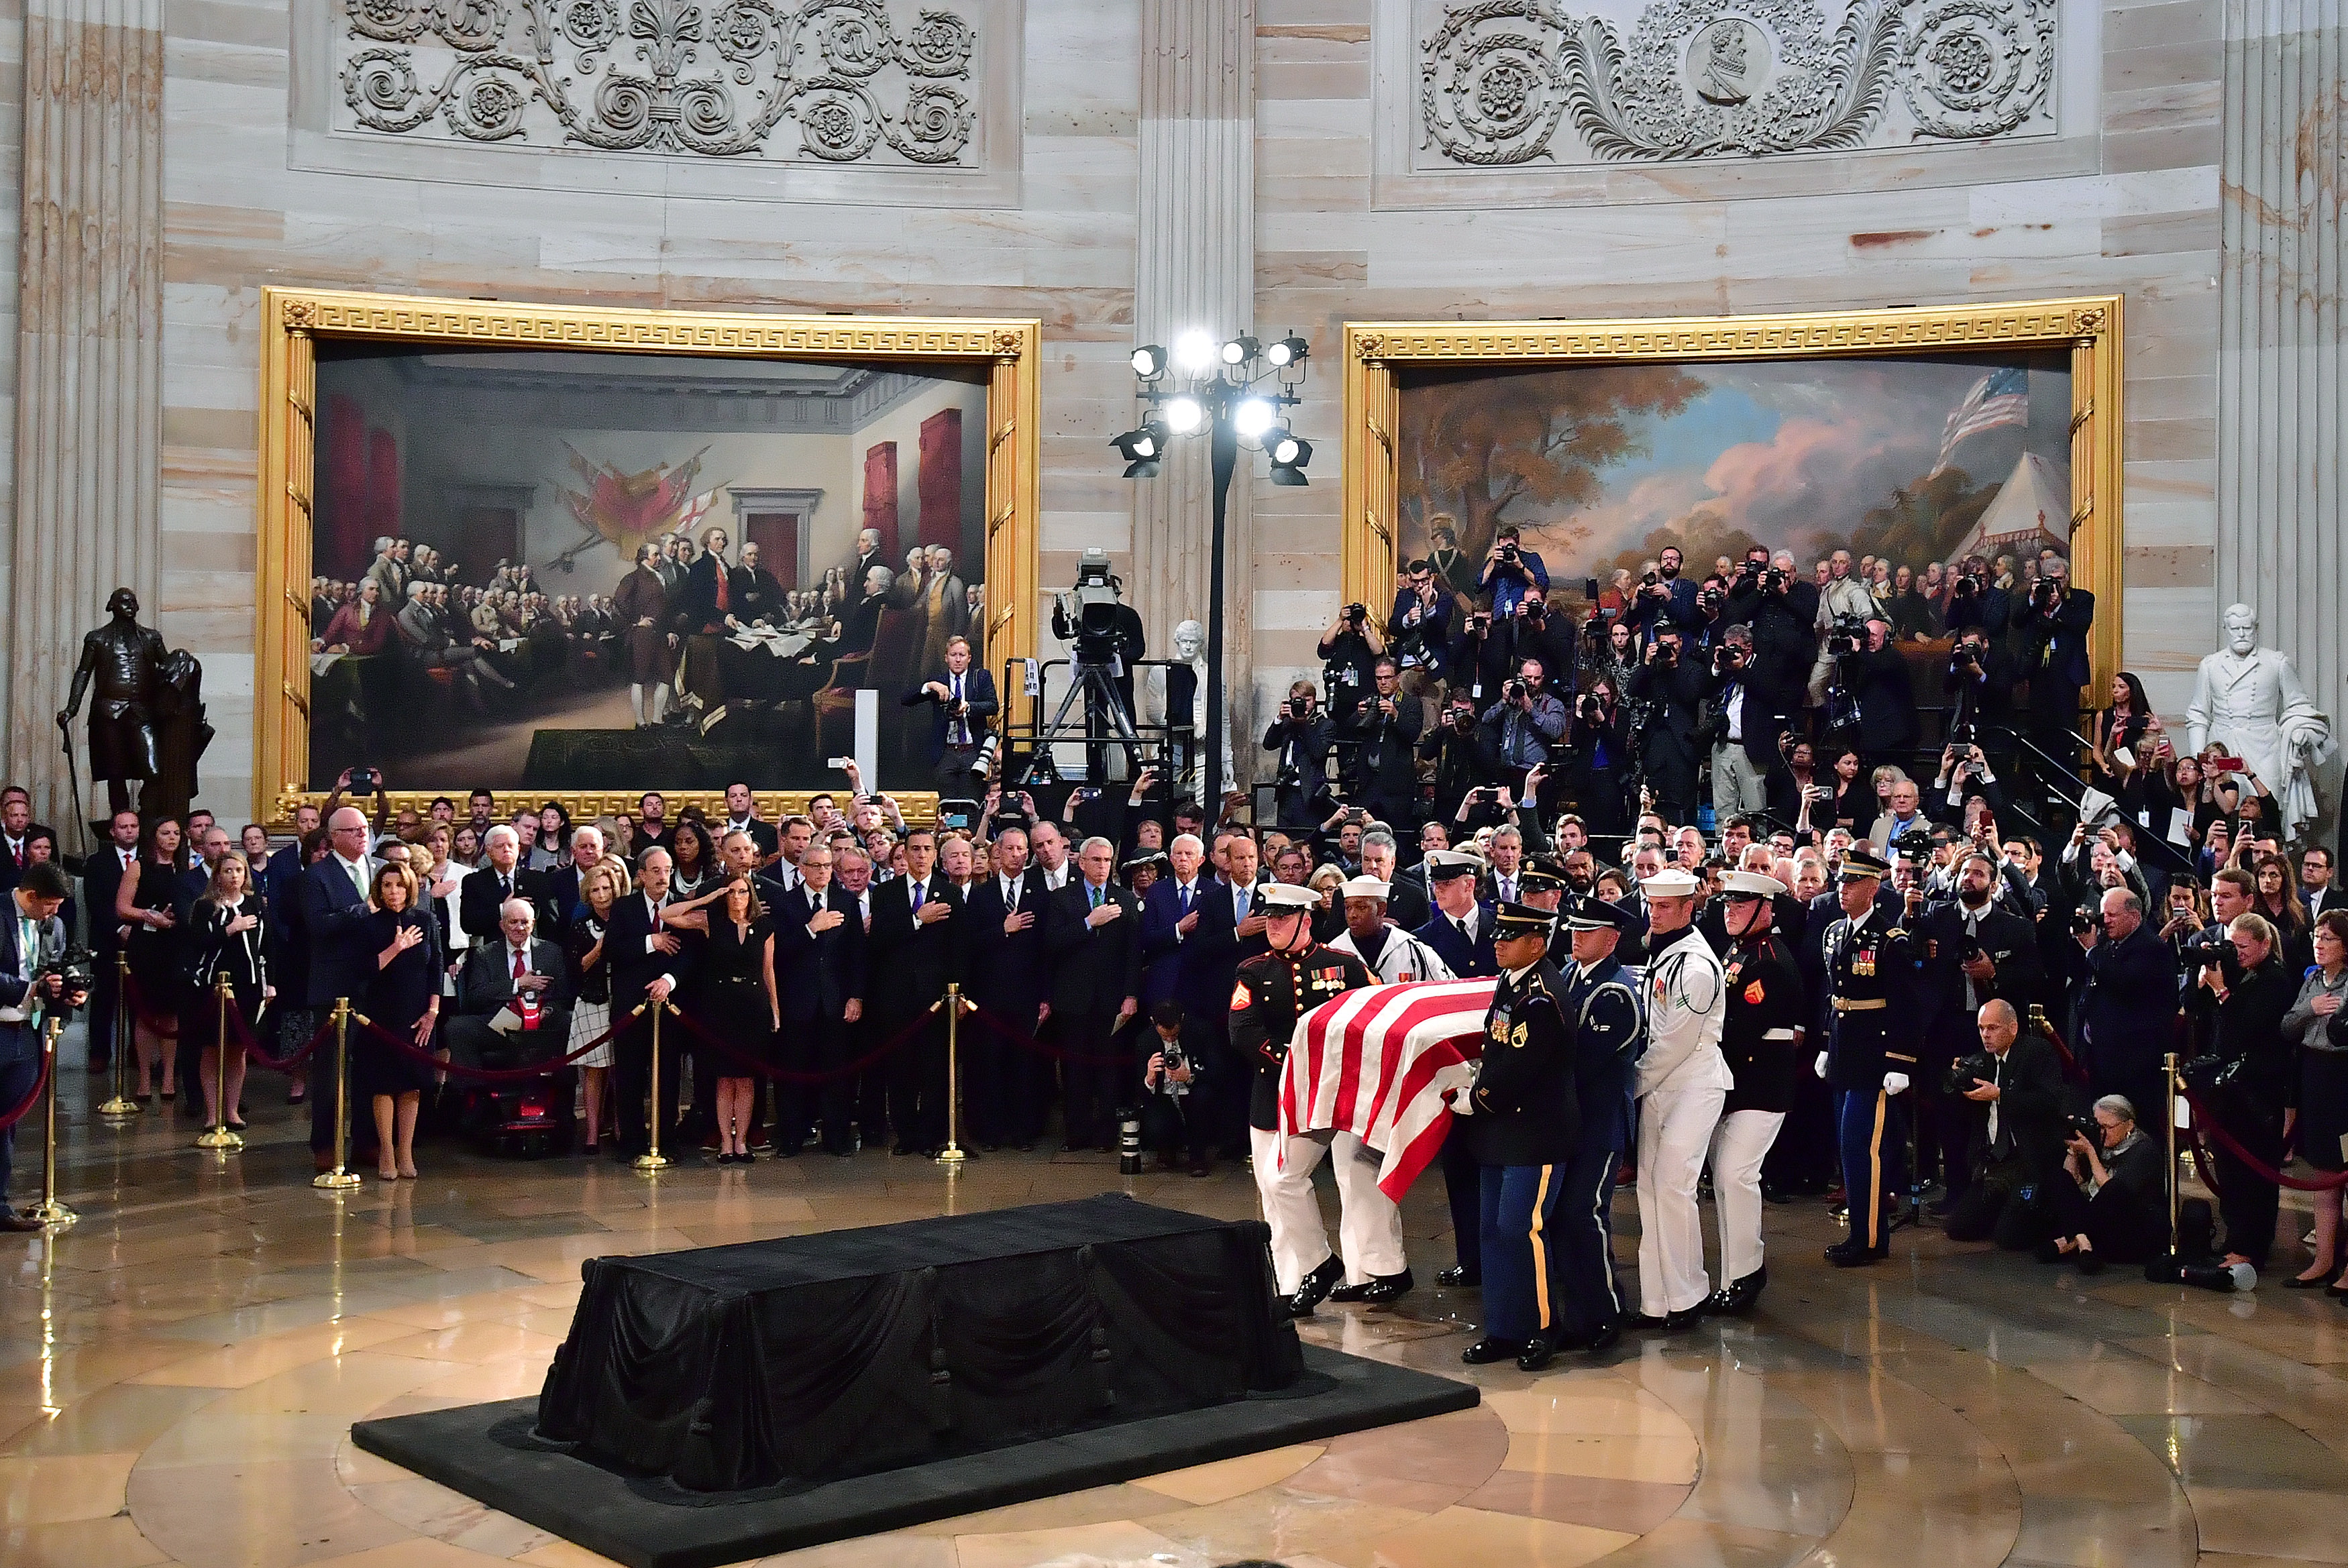 epa06987685 A military honor guard carries the casket of former Senator John McCain into the Capitol Rotunda where he will lie in state at the U.S. Capitol, in Washington, DC, USA, 31 August 2018. McCain will lie in state at the US Capitol and have a funeral service at the National Cathedral before being laid to rest at the US Naval Academy in Annapolis, Maryland. McCain died 25 August, 2018 from brain cancer at his ranch in Sedona, Arizona, USA. He was a veteran of the Vietnam War, served two terms in the US House of Representatives, and was elected to five terms in the US Senate. McCain also ran for president twice, and was the Republican nominee in 2008.  EPA/KEN CEDENO / POOL